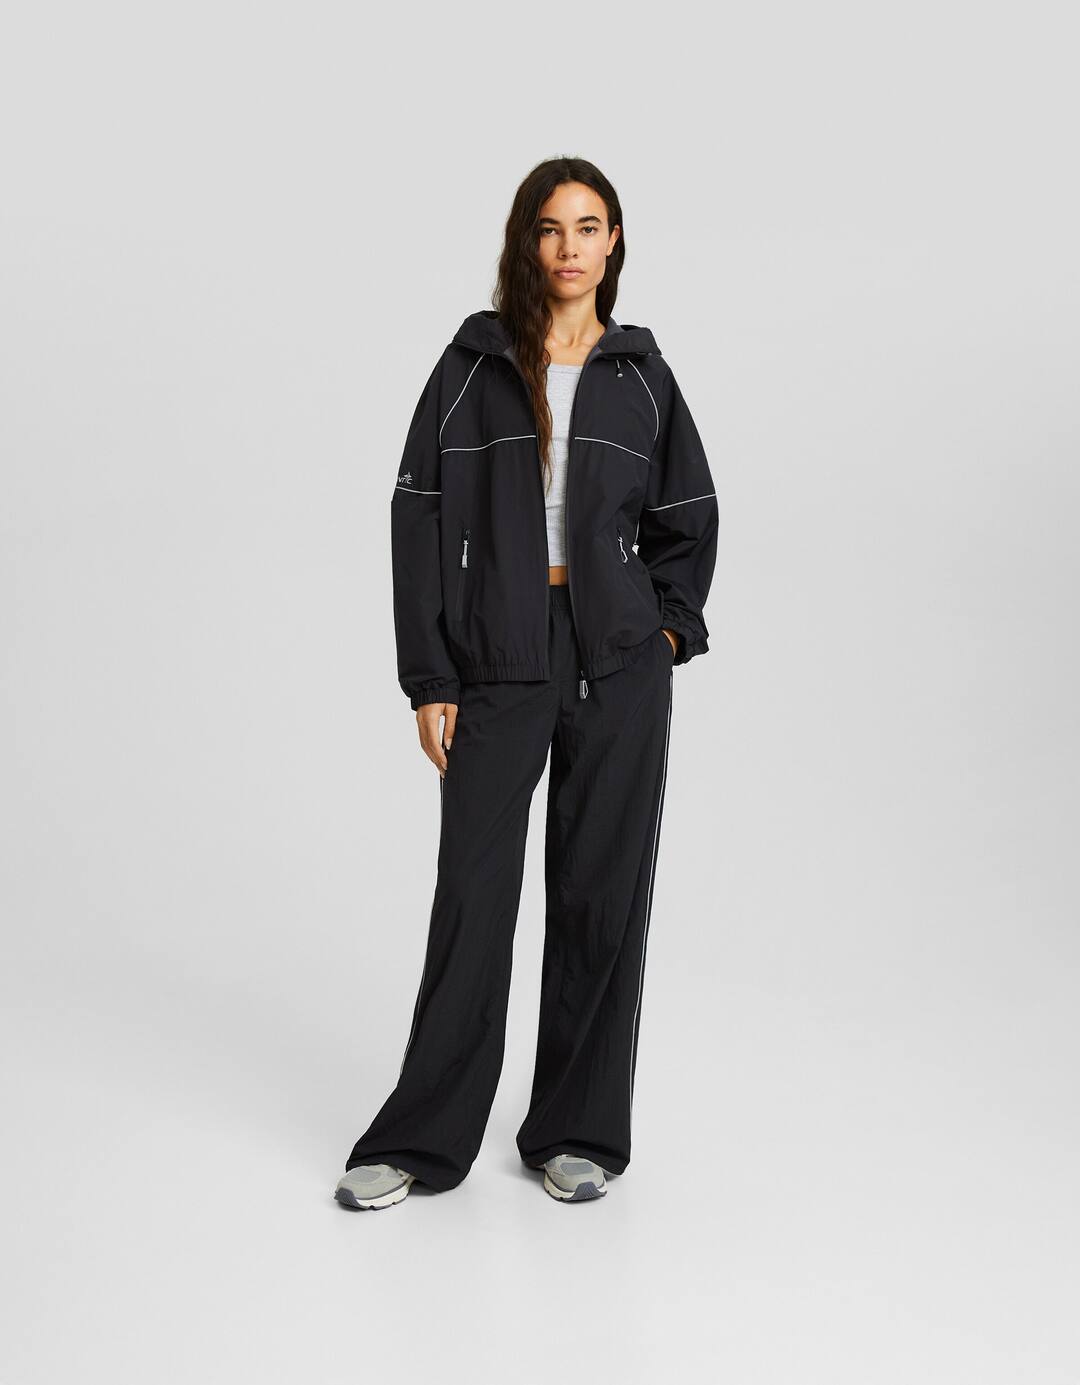 Jacket and trousers set with reflective detail